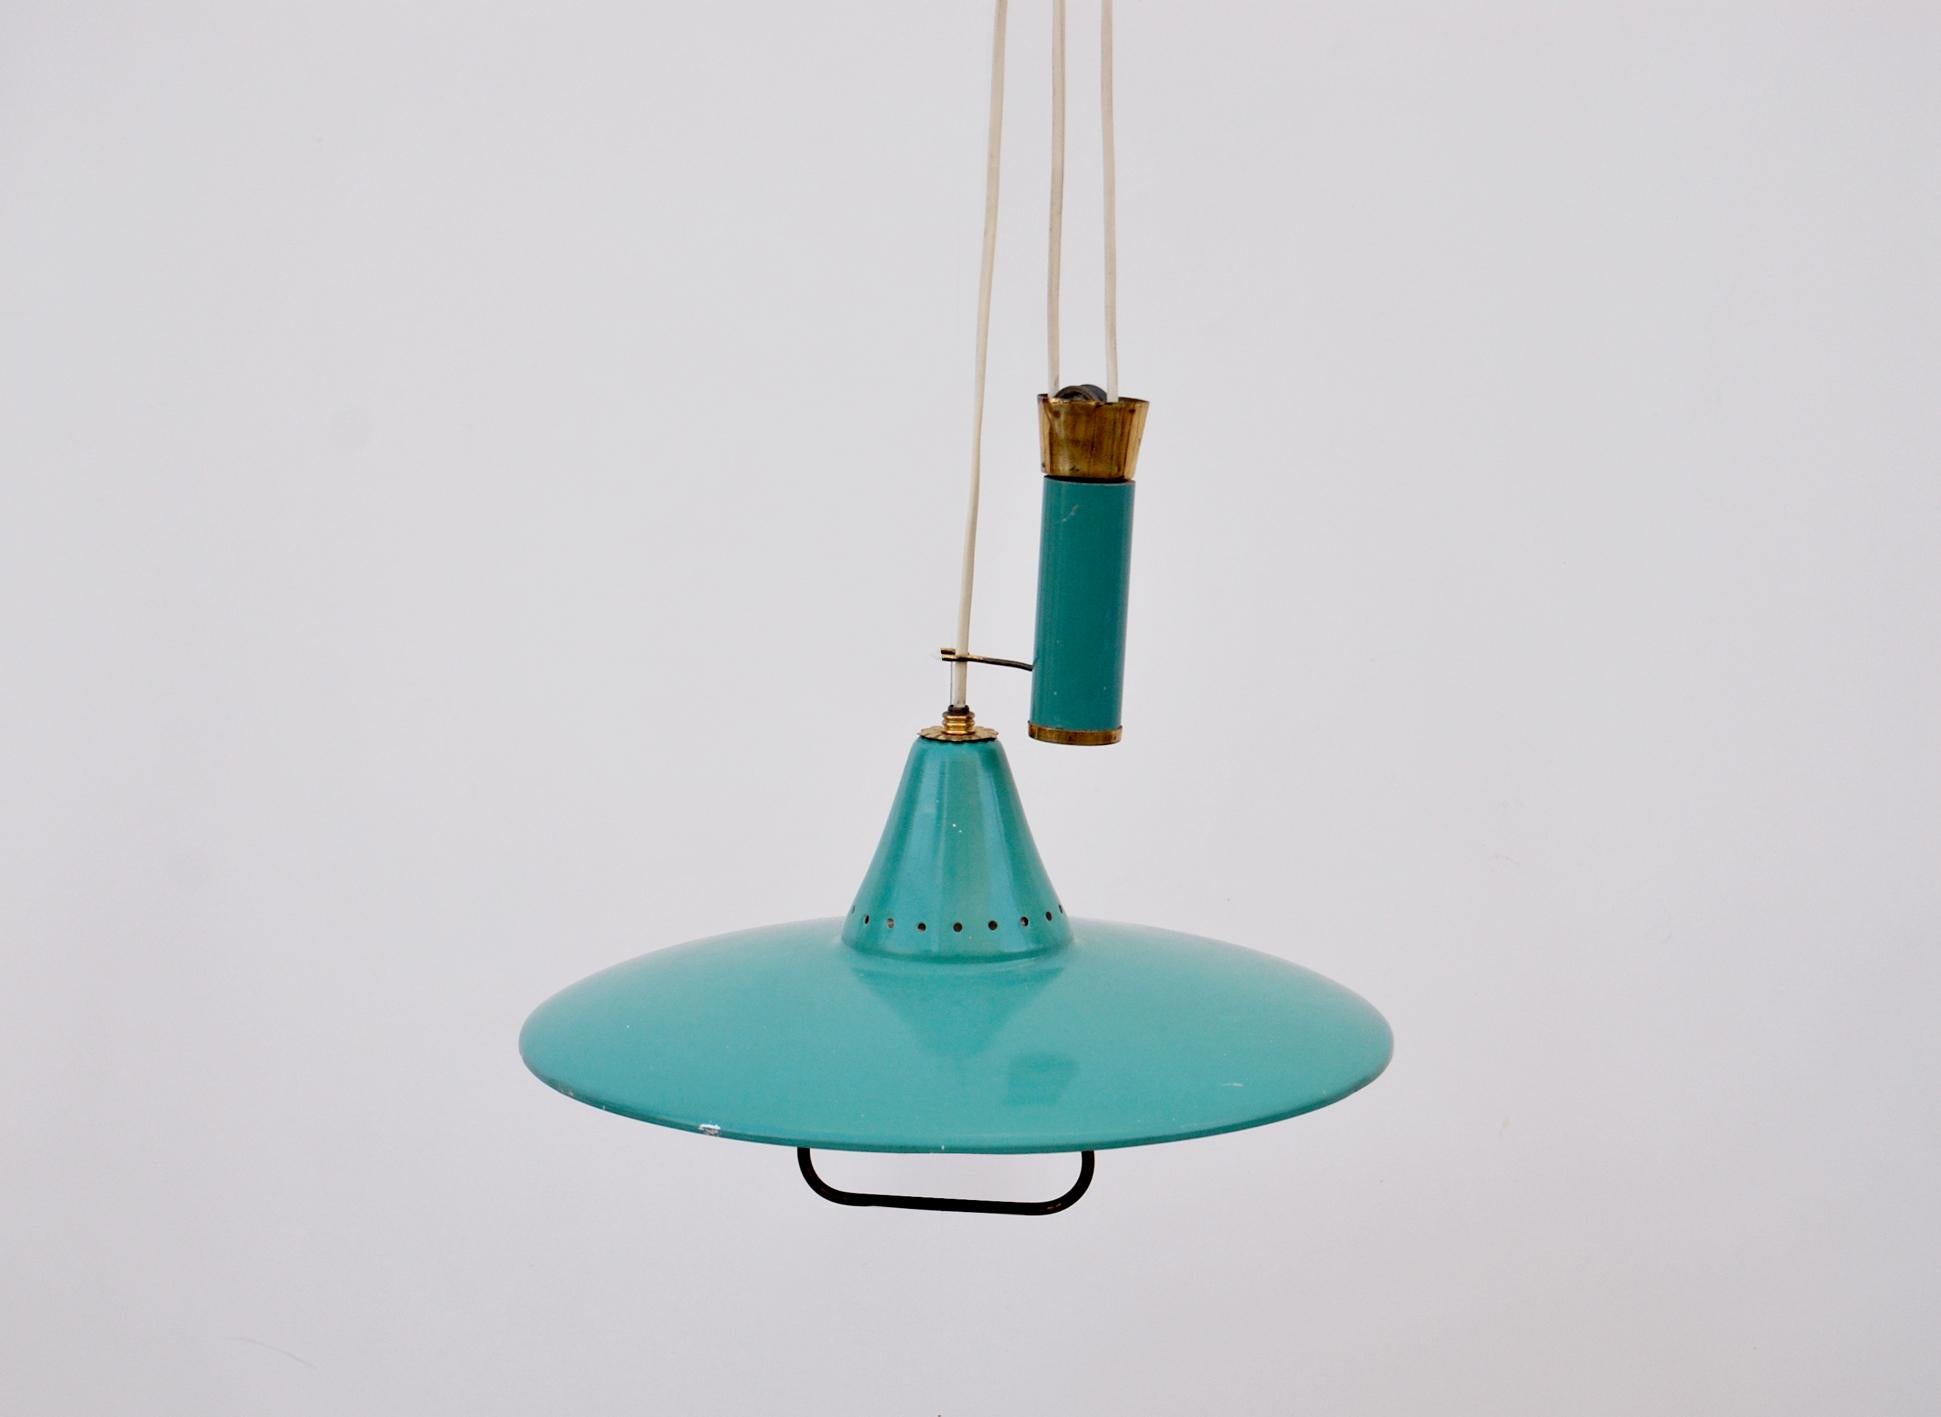 Brass, aluminum and metal pendant chandelier in the style of Stilnovo, 1950s, Made in Italy. 
Suspension chandelier with up-and-down mechanism with brass accessory under the enameled aluminum diffuser. It can be adjusted in height.
Condition is